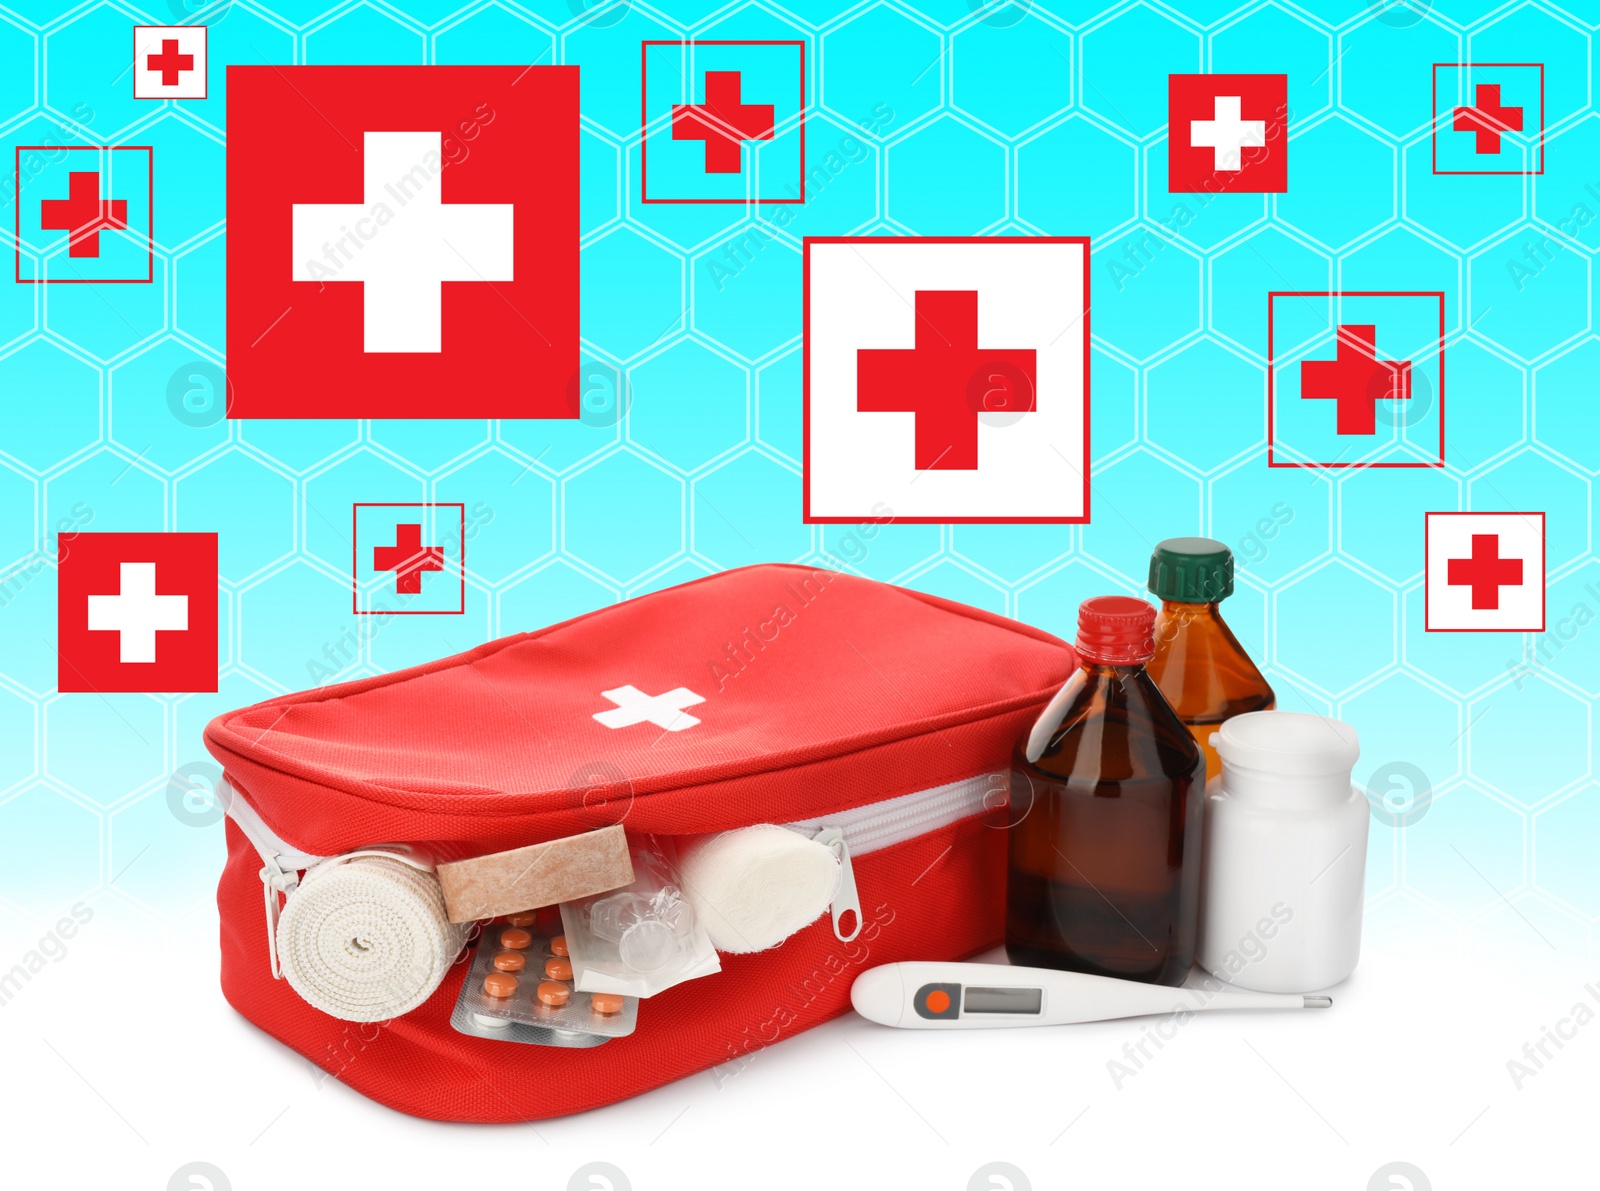 Image of First aid kit and illustrations of cross symbols on light blue background